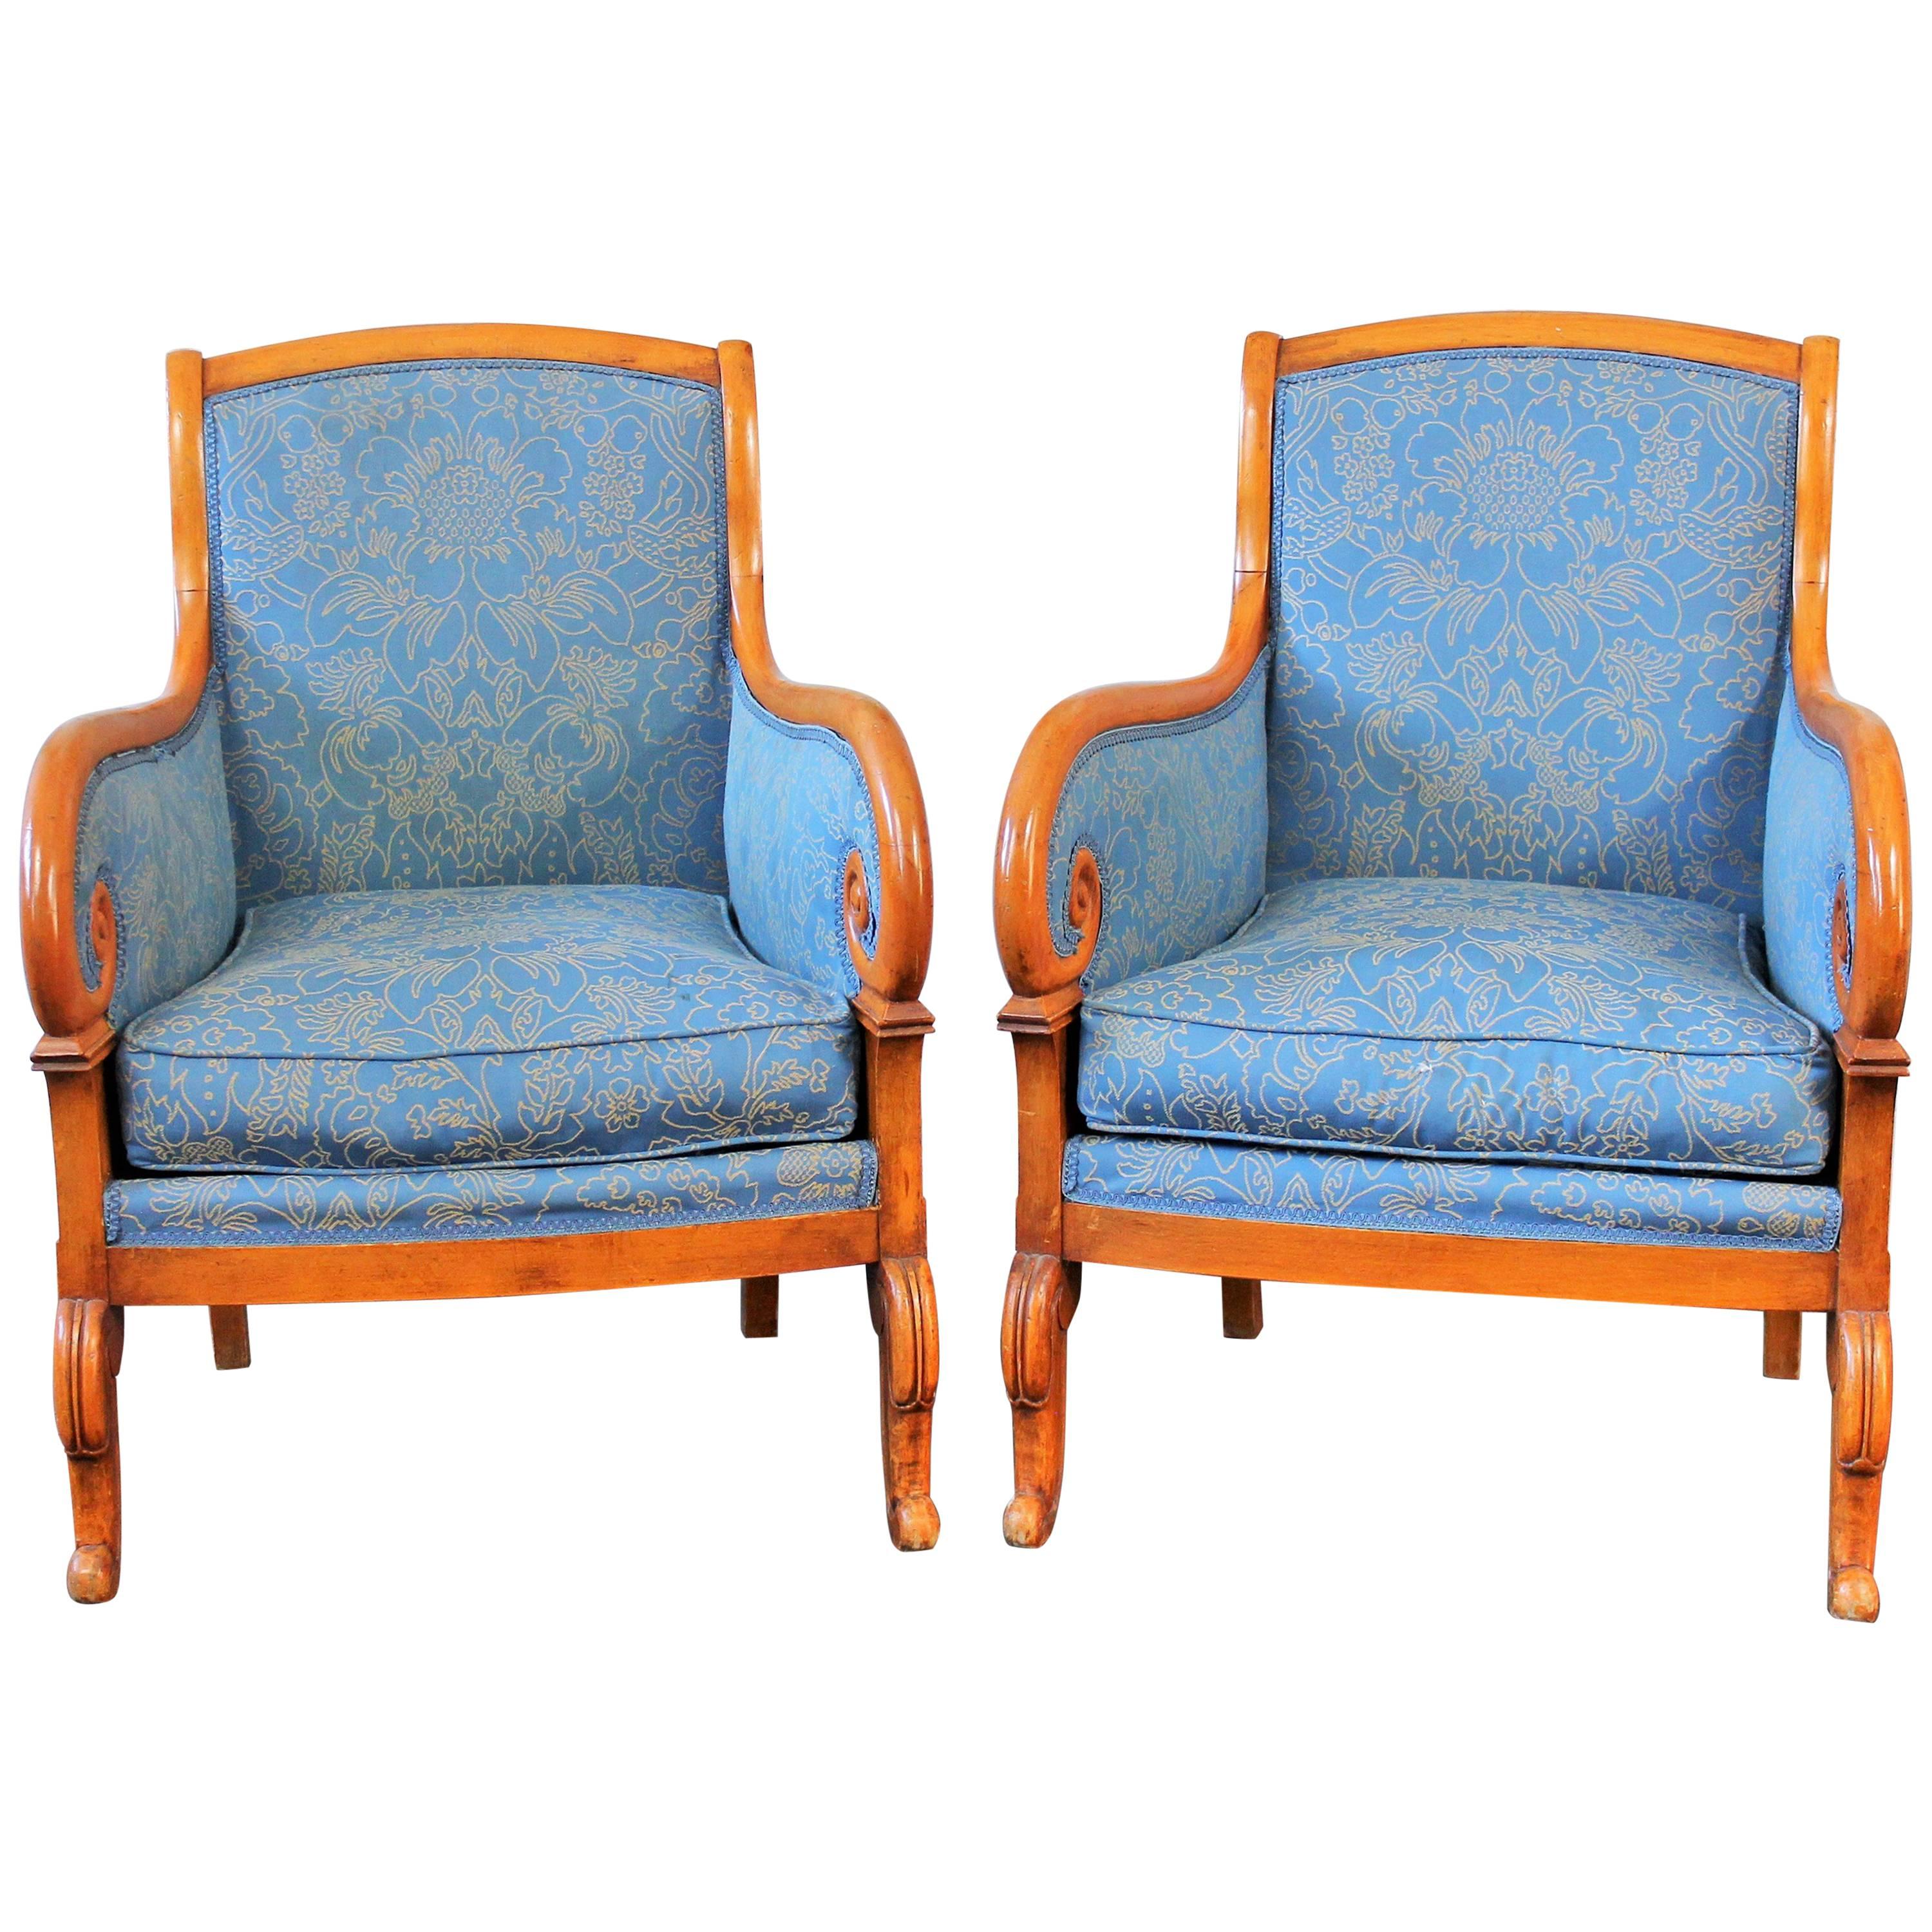 Louis-Philippe Period Bergeres Armchairs in Fruitwood